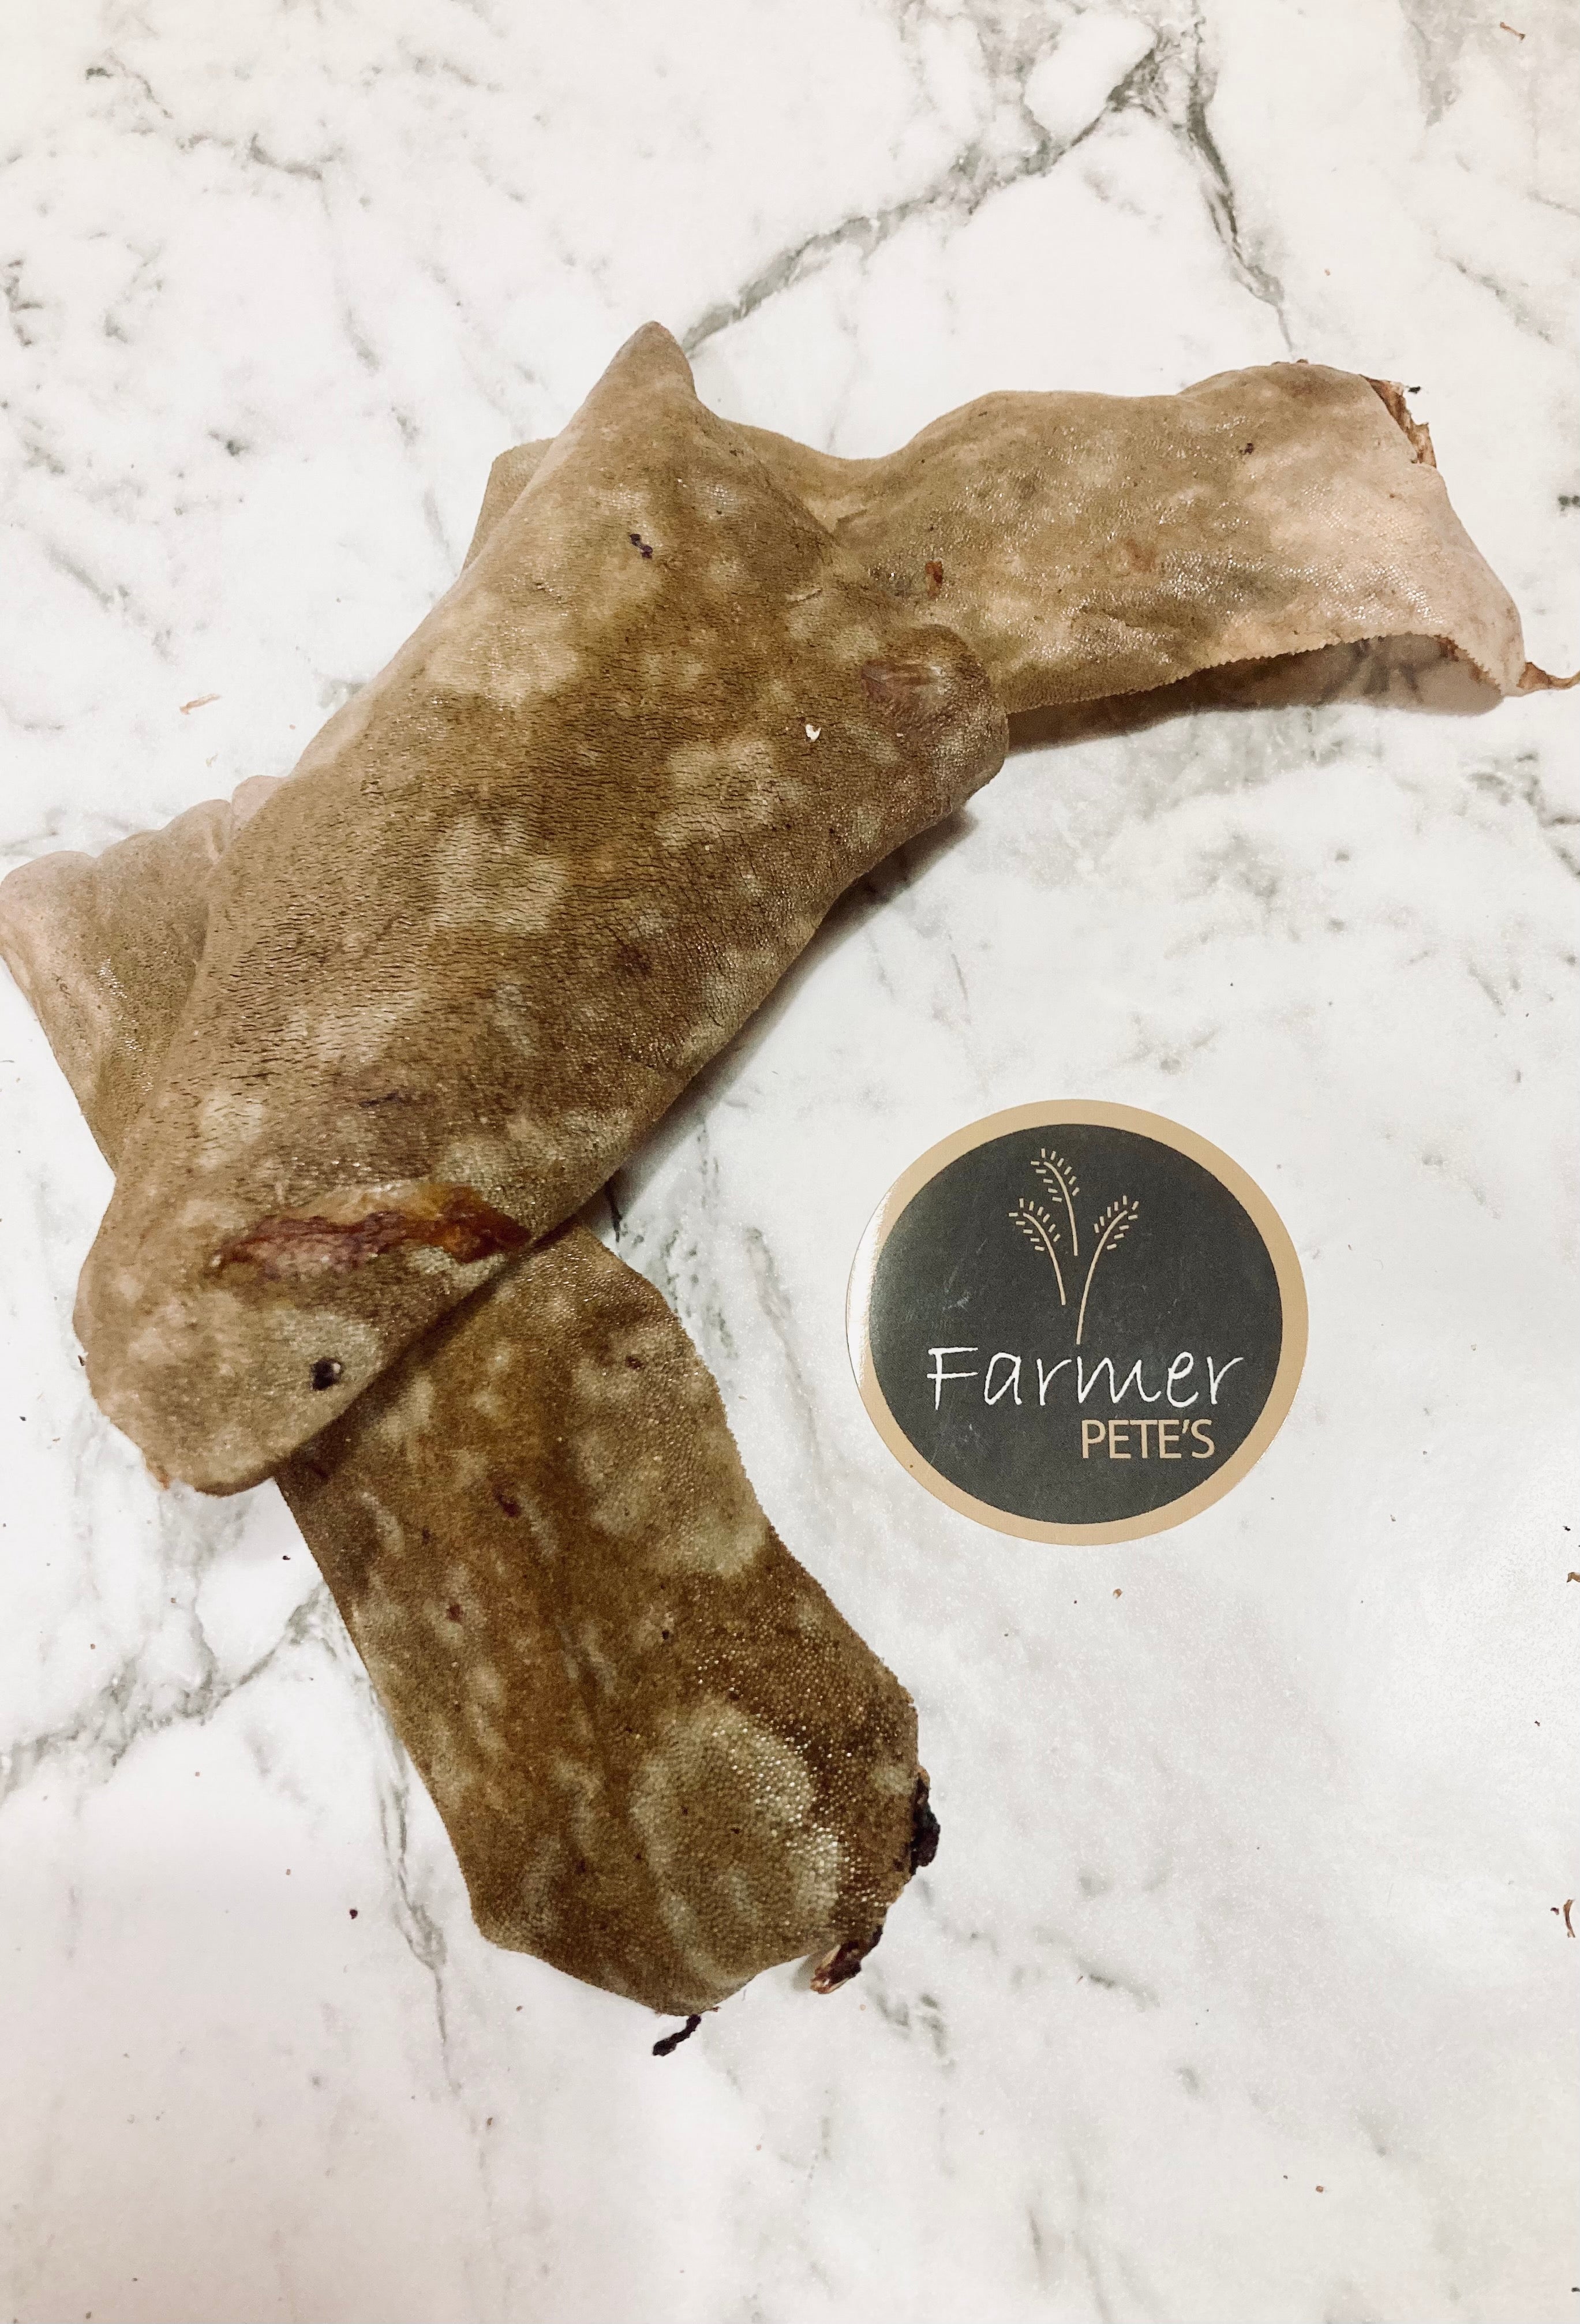 100% Natural dehydrated Shark Skin by Farmer Pete's.